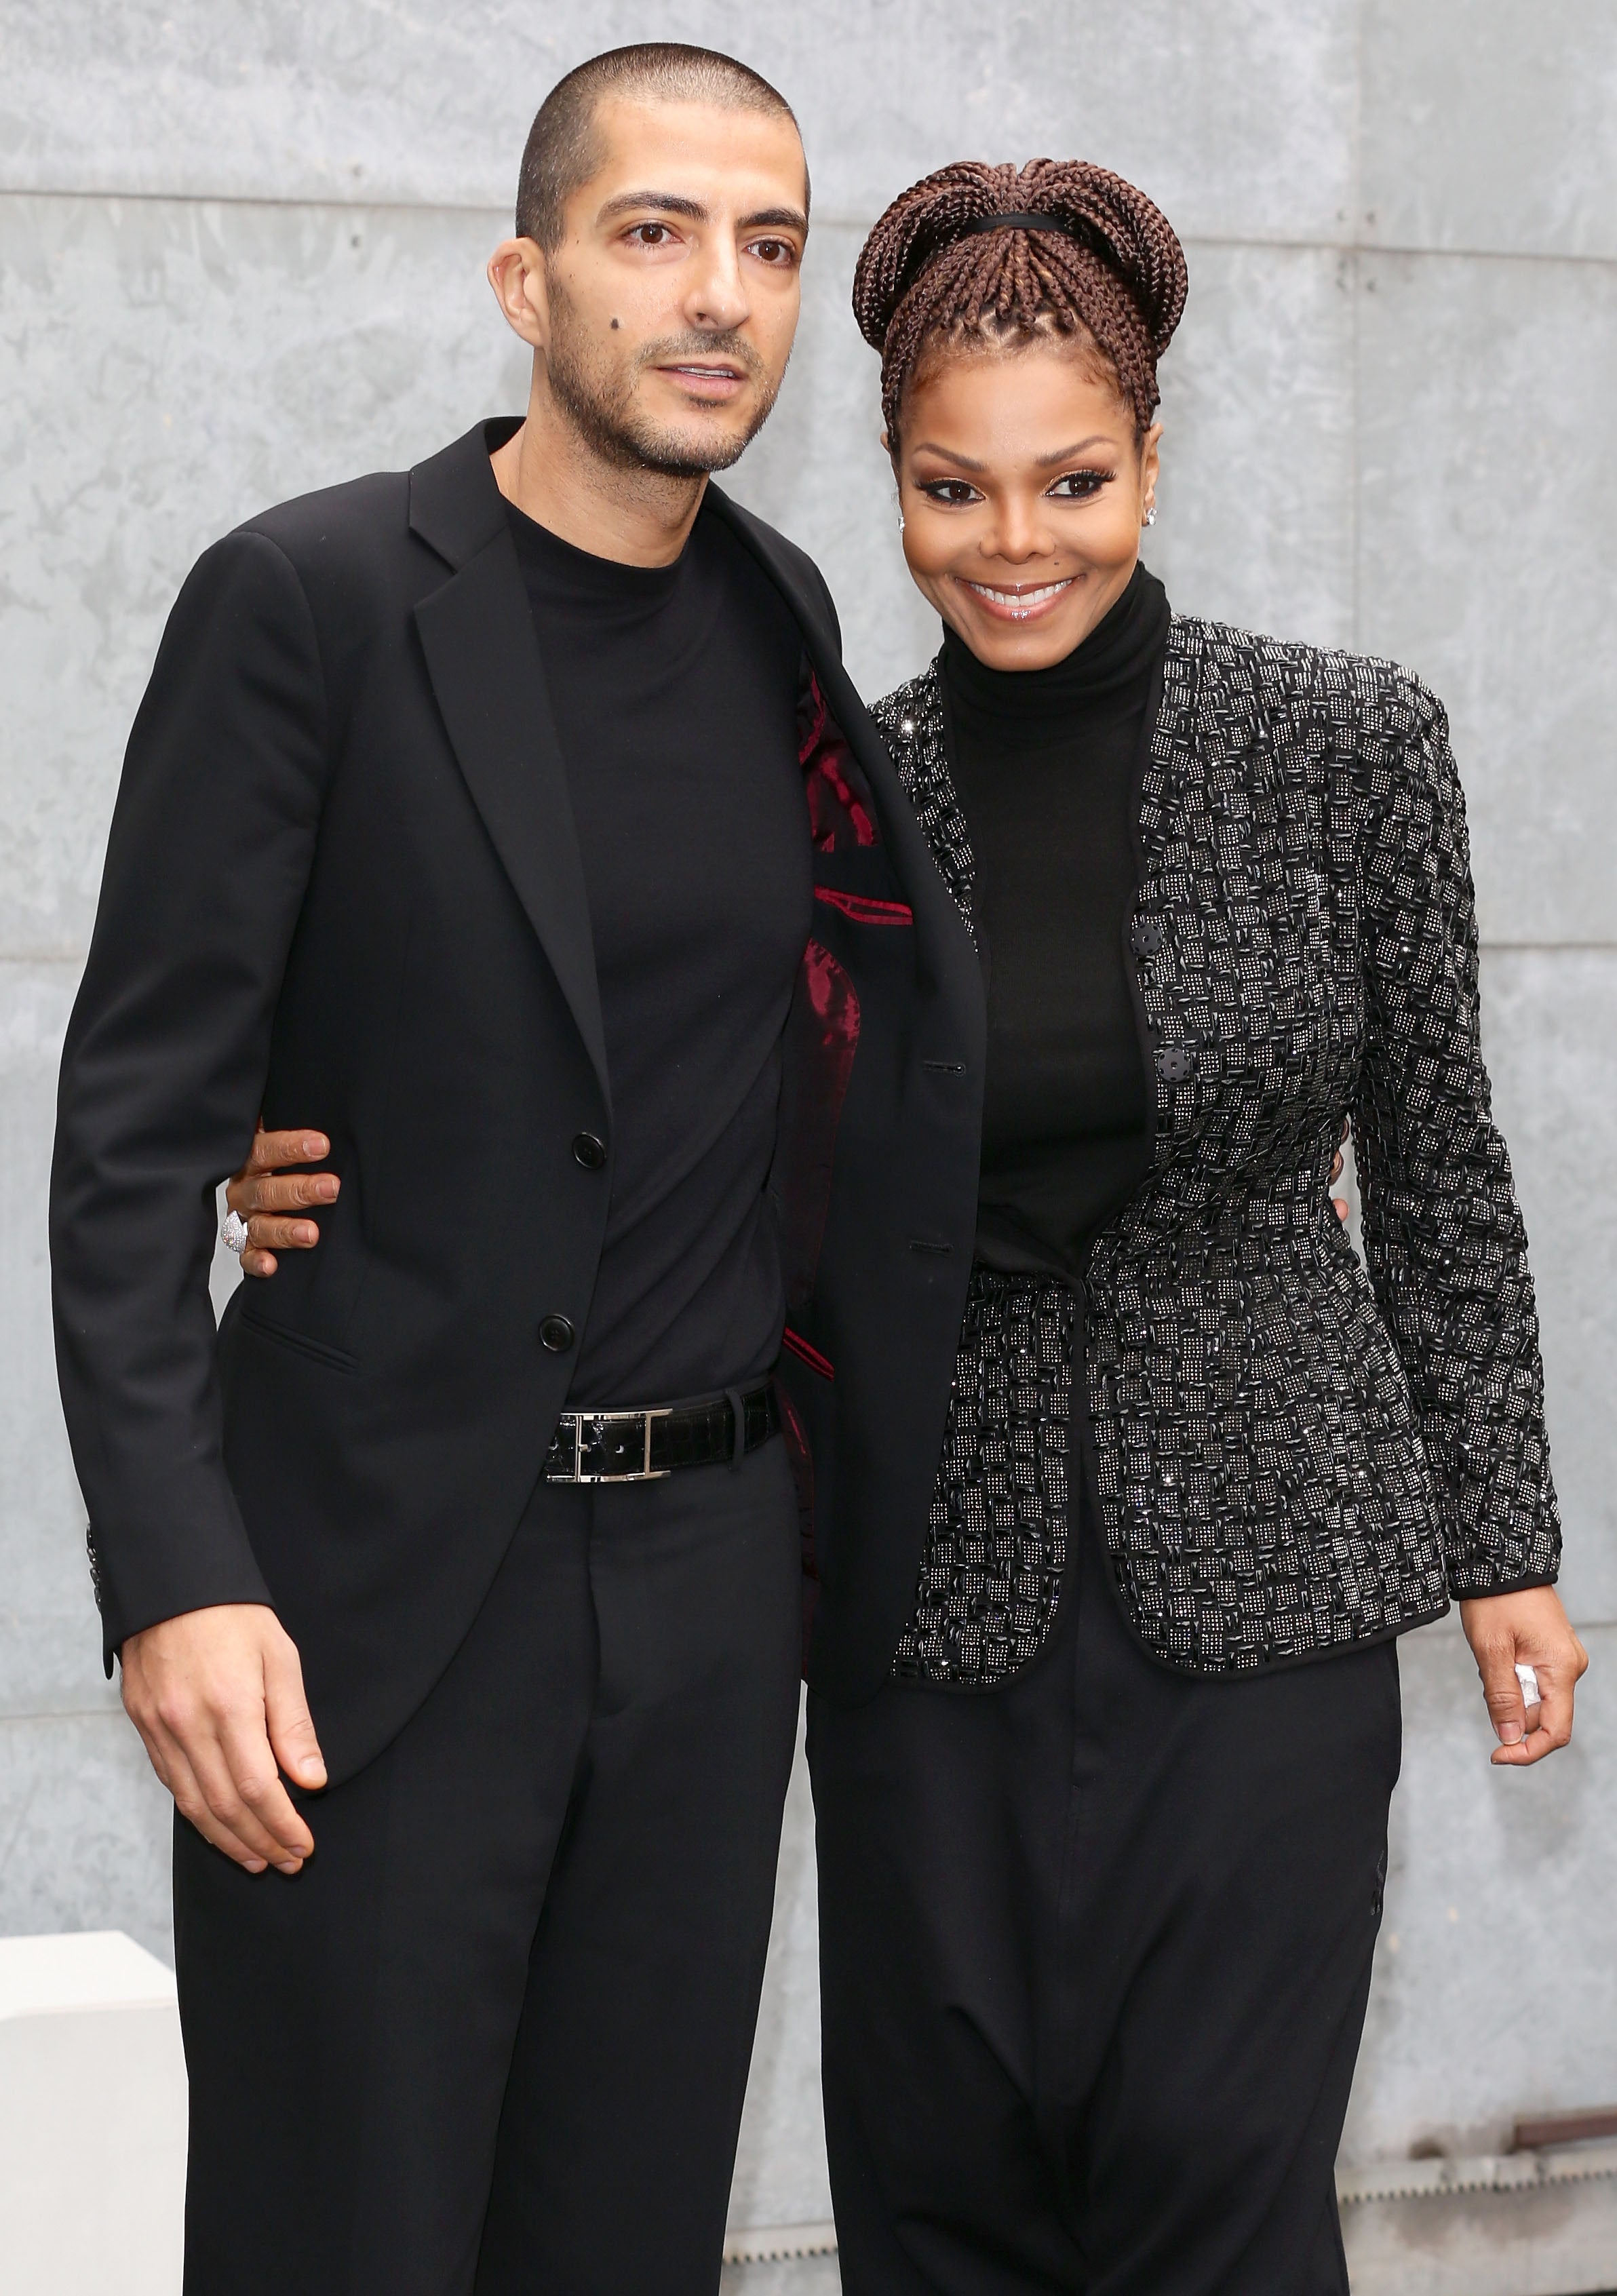 Janet Jackson Splits from Husband Wissam Al Mana 3 Months After Giving Birth to First Child: Reports
